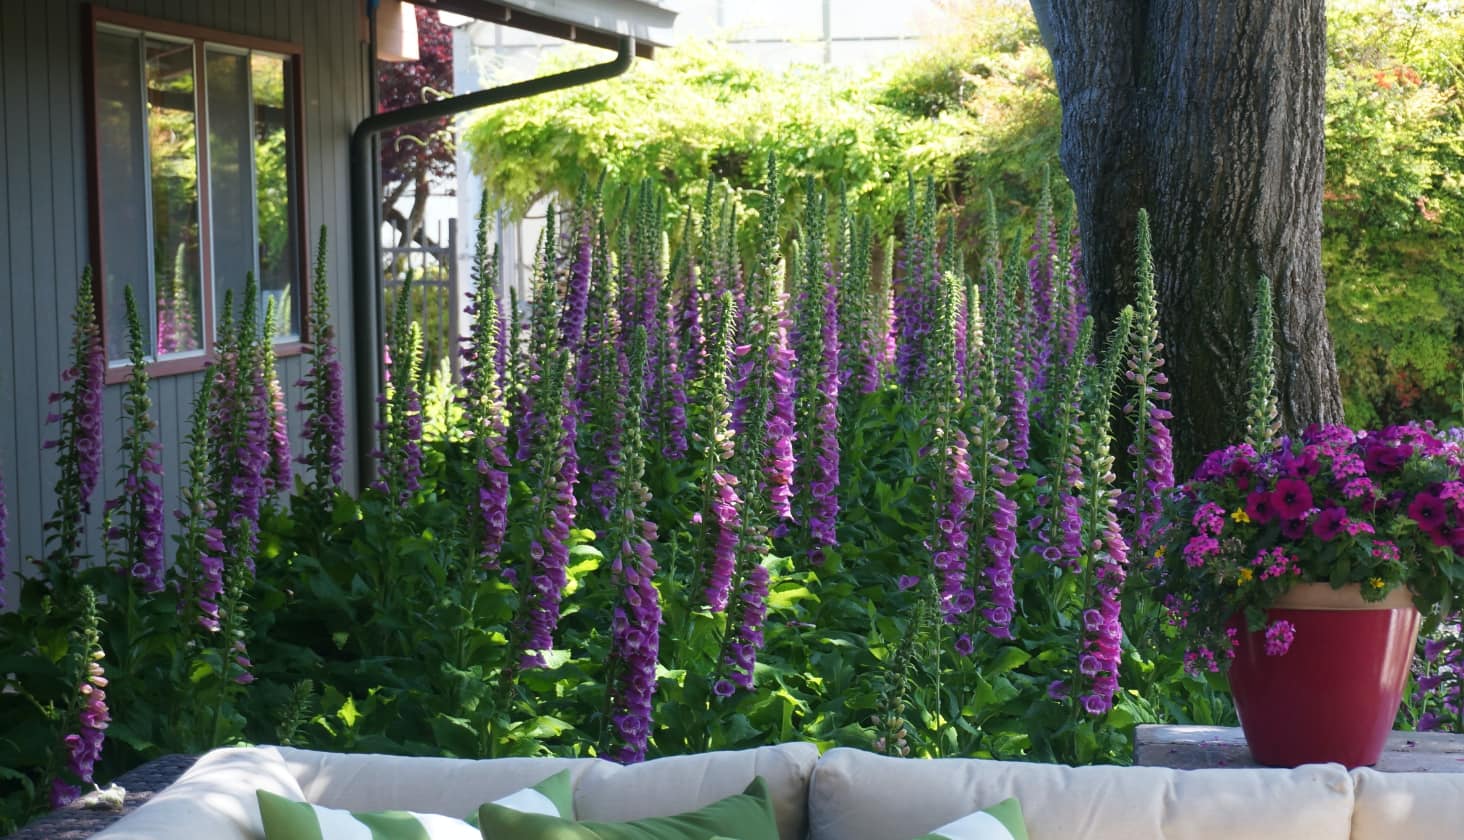 A backyard with lavender plants, flowerpot, and outdoor couch